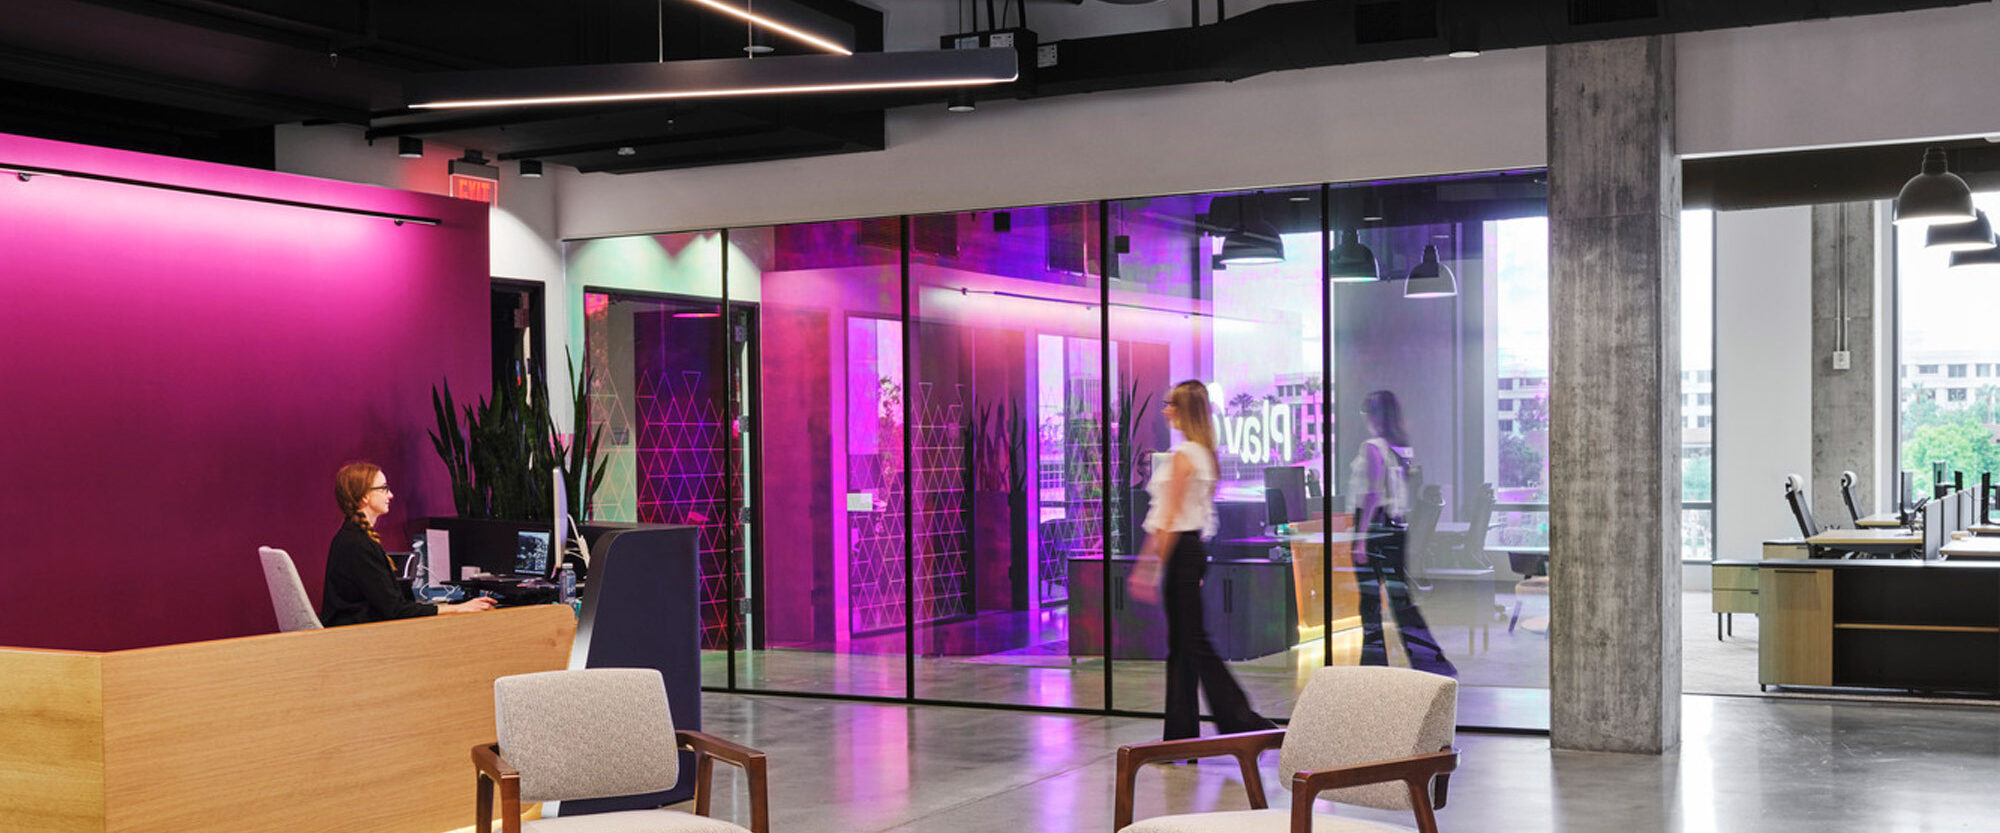 Modern office lobby with a minimalist reception desk, flanked by two white chairs. Vibrant magenta glass panels create a dynamic backdrop, while sleek, geometric light fixtures add a contemporary touch overhead. The design fosters an airy and welcoming atmosphere.